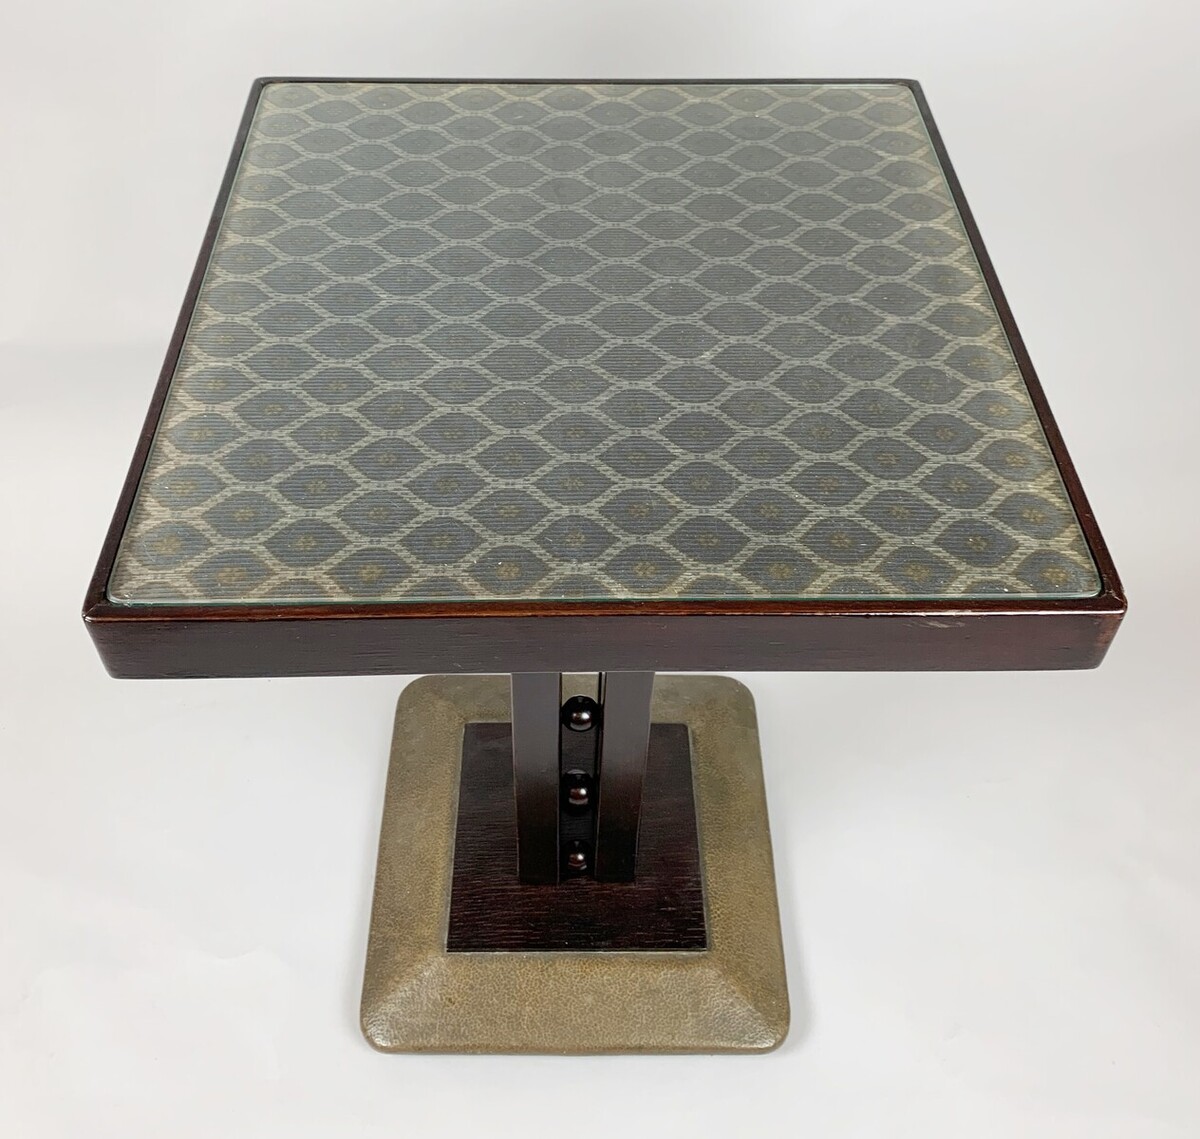 Vienna secession Gueridon with glass plate by Josef Hoffmann - Austria c.1900